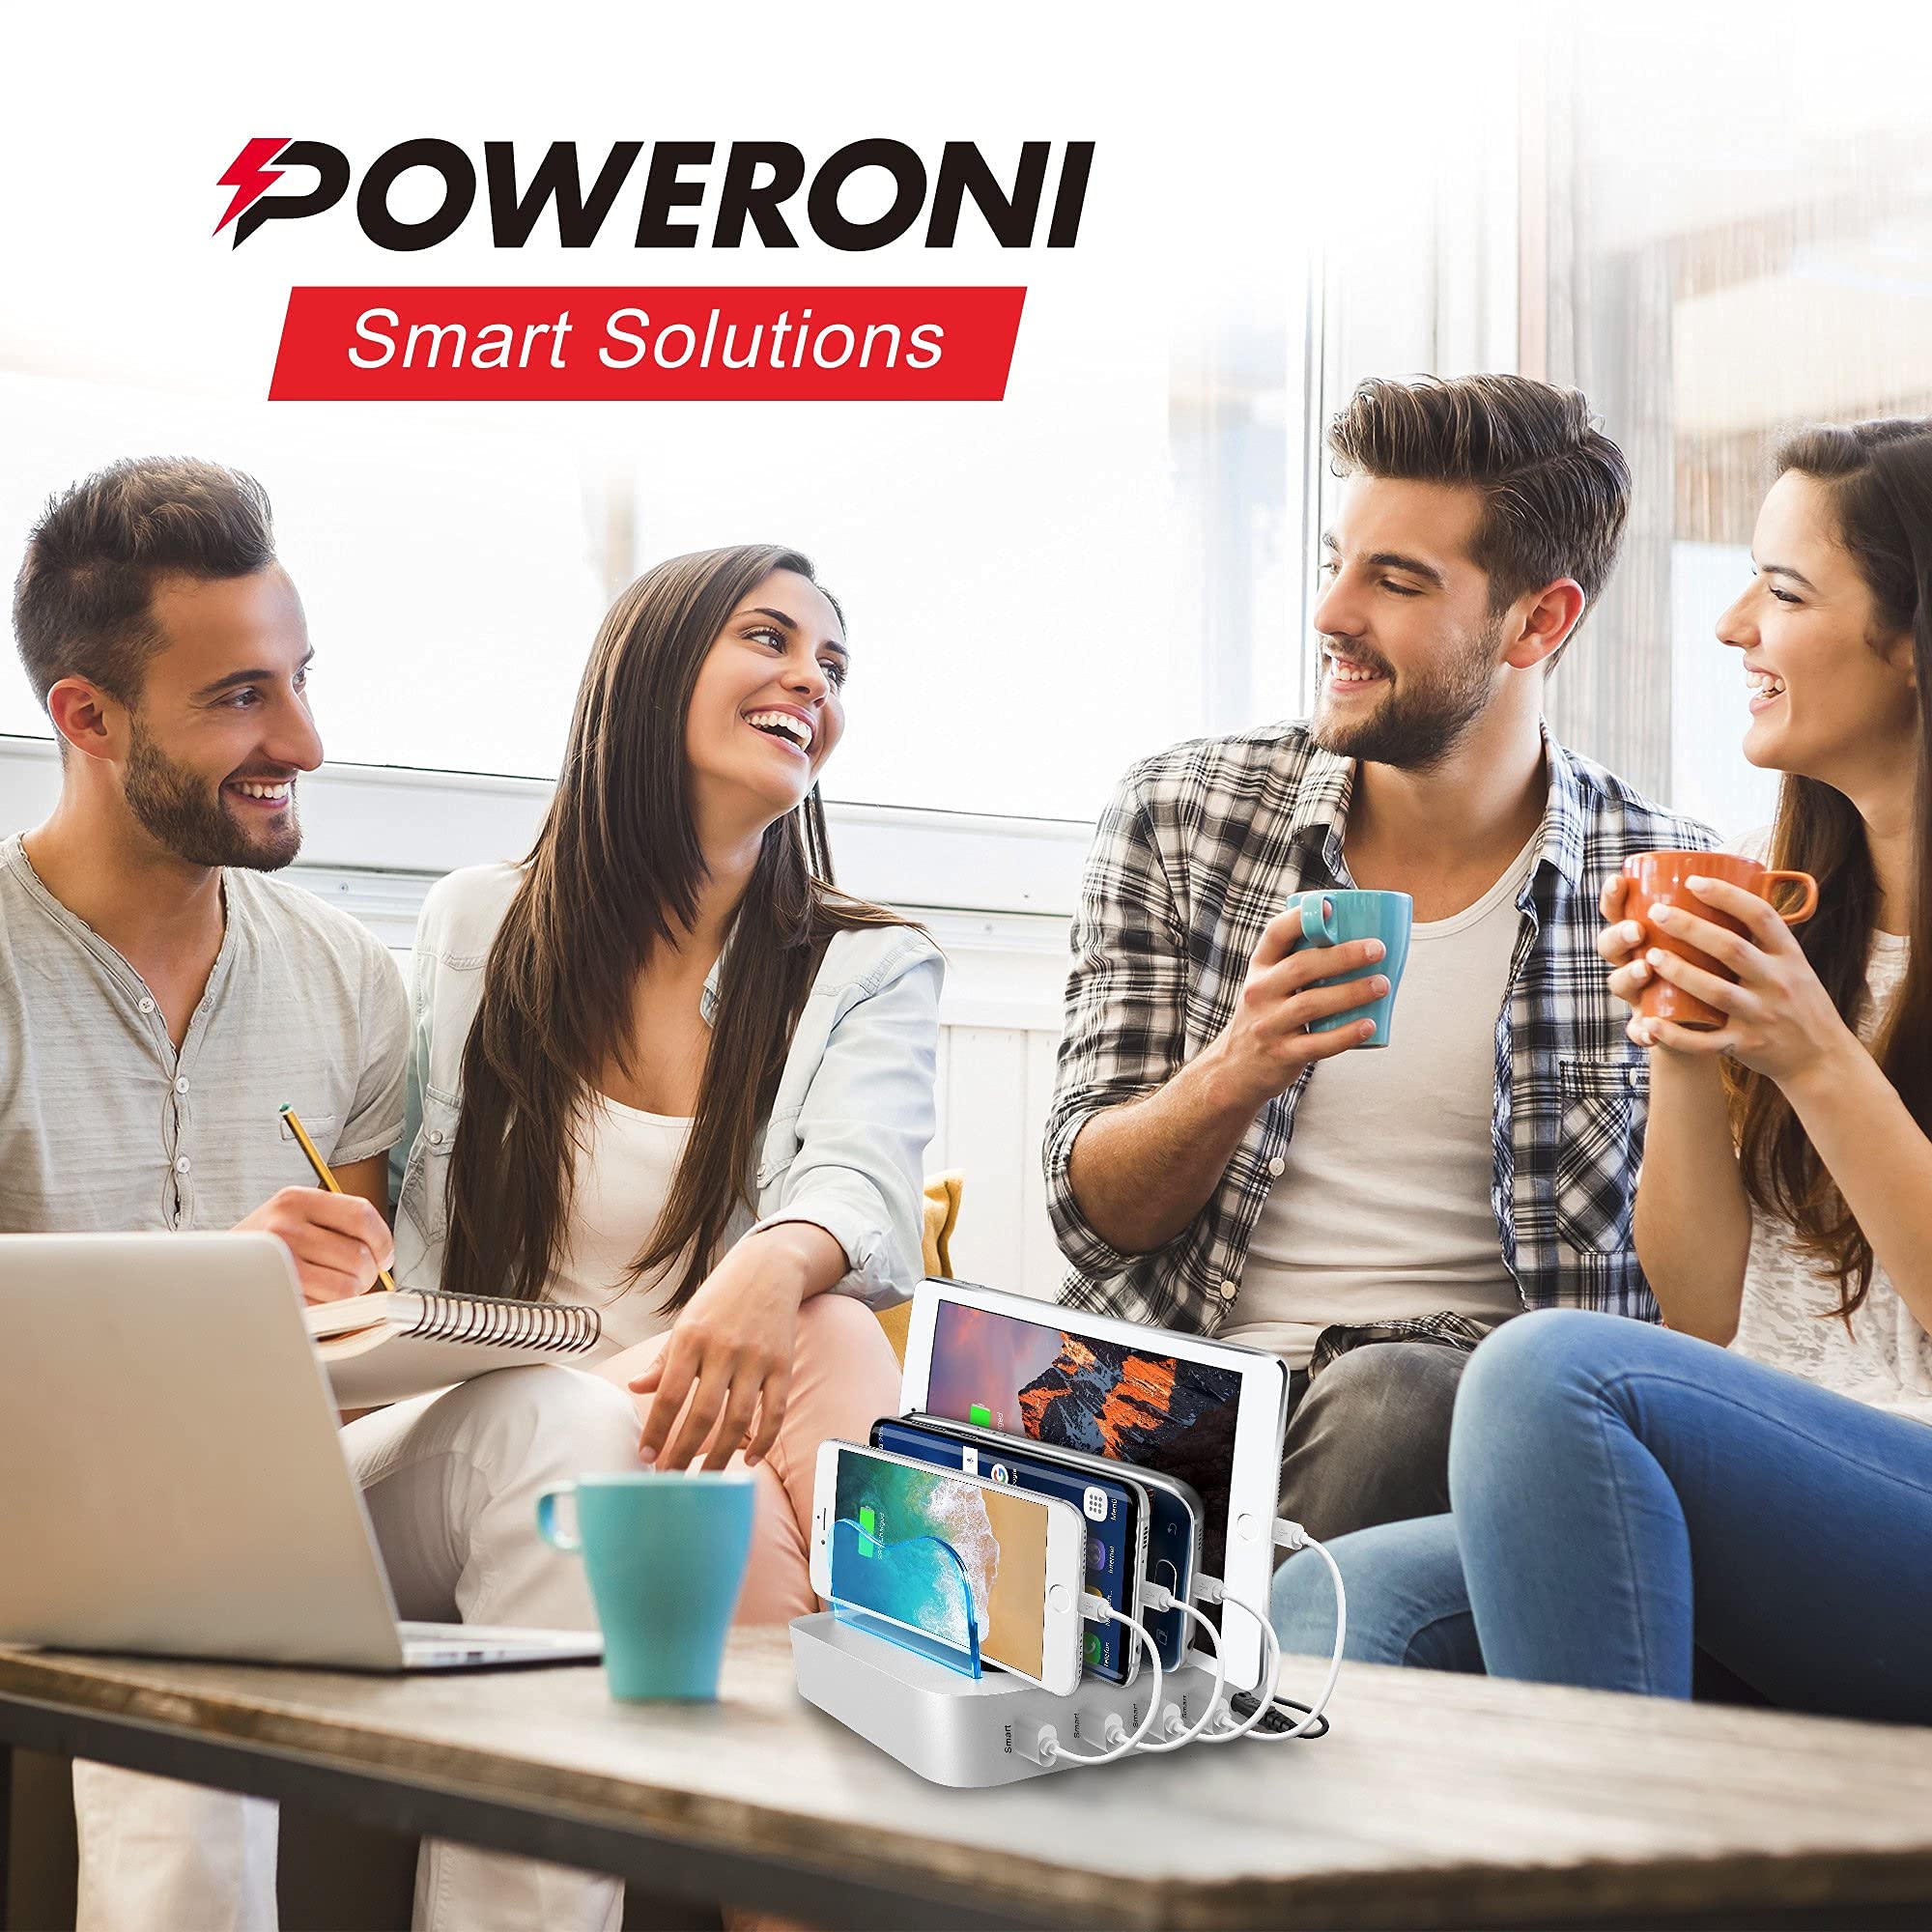 Poweroni USB Charging Station for Multiple Devices Apple Android Compatible - Charging Station Organizers - Fast Charge Multi Device Phone Charger Station Charging Dock  - Very Good